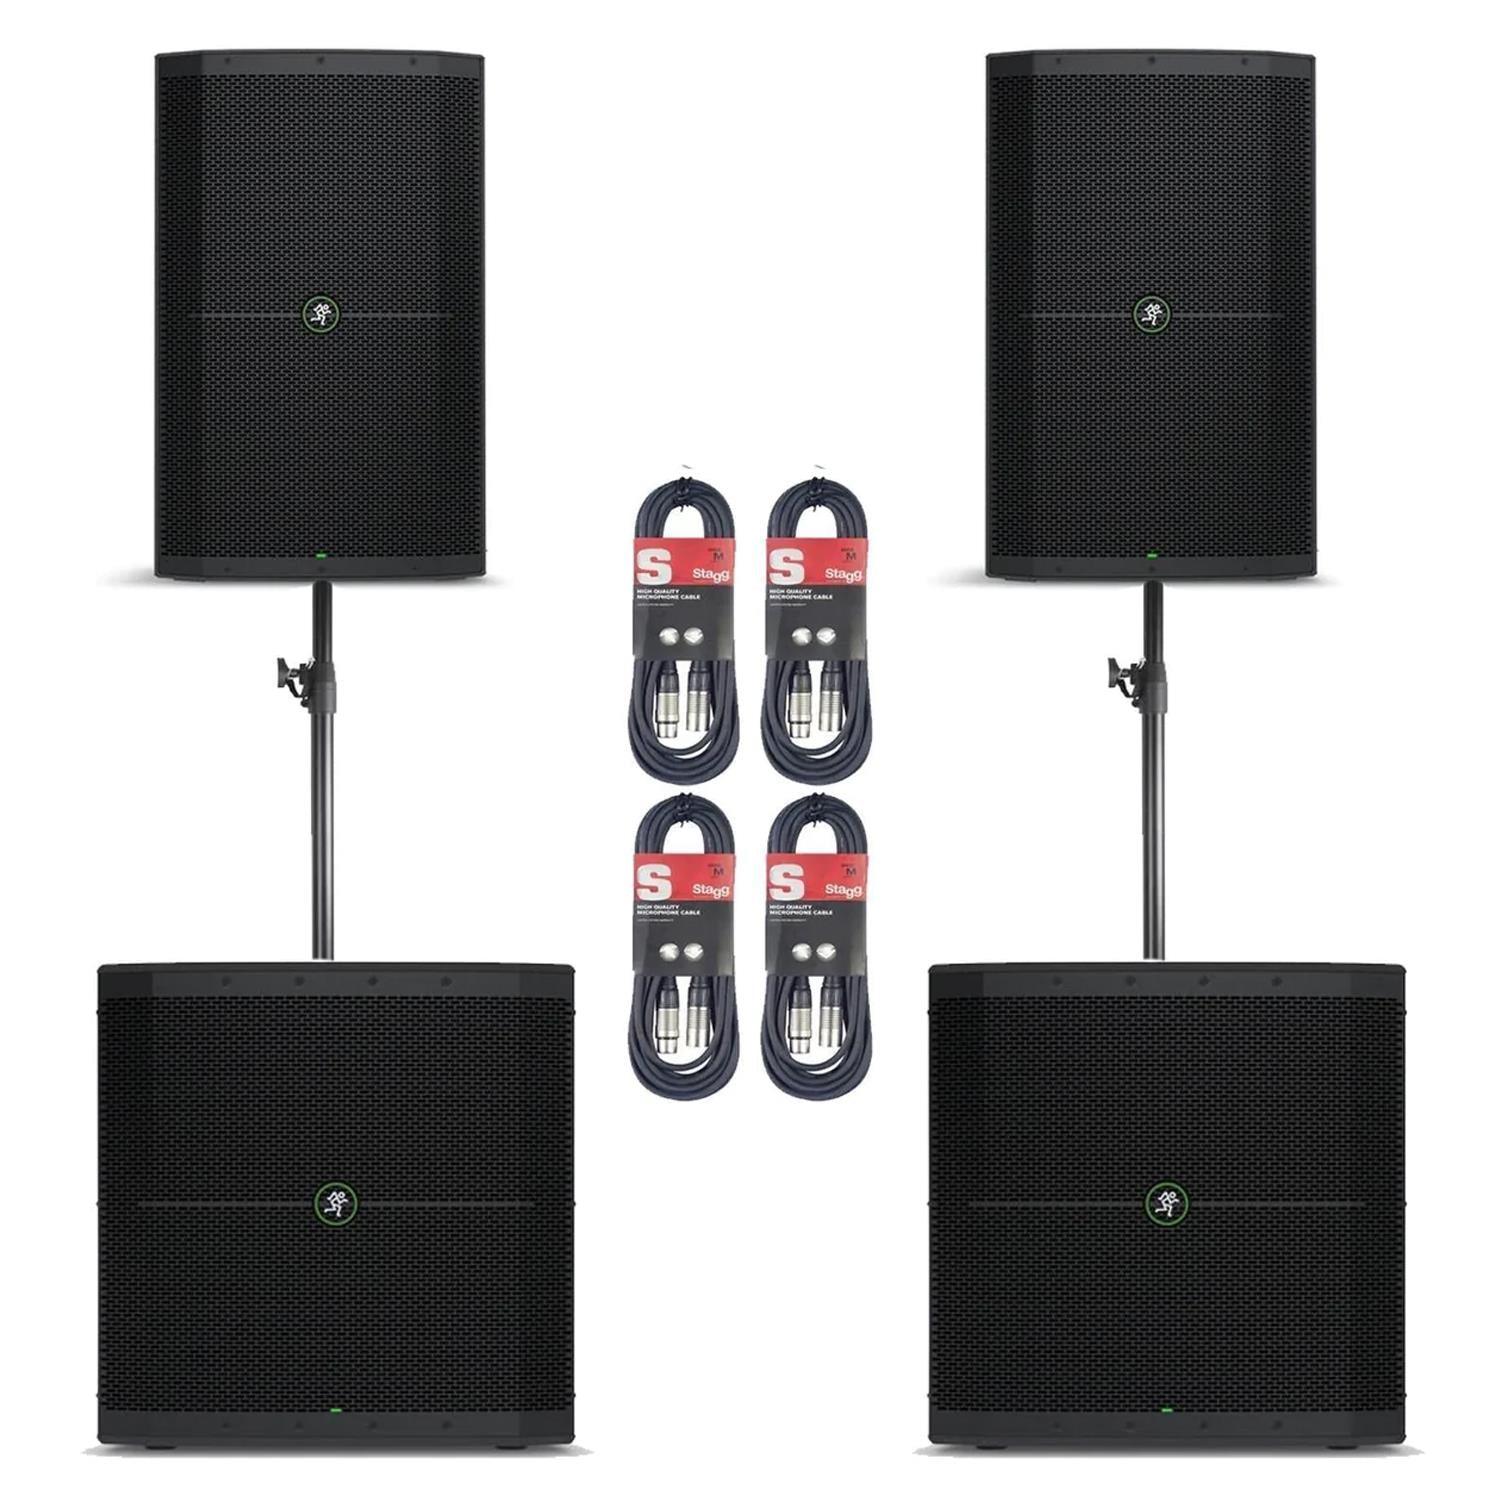 Mackie Thump 215XT Speakers & Thump 118s Subwoofer Package - DY Pro Audio